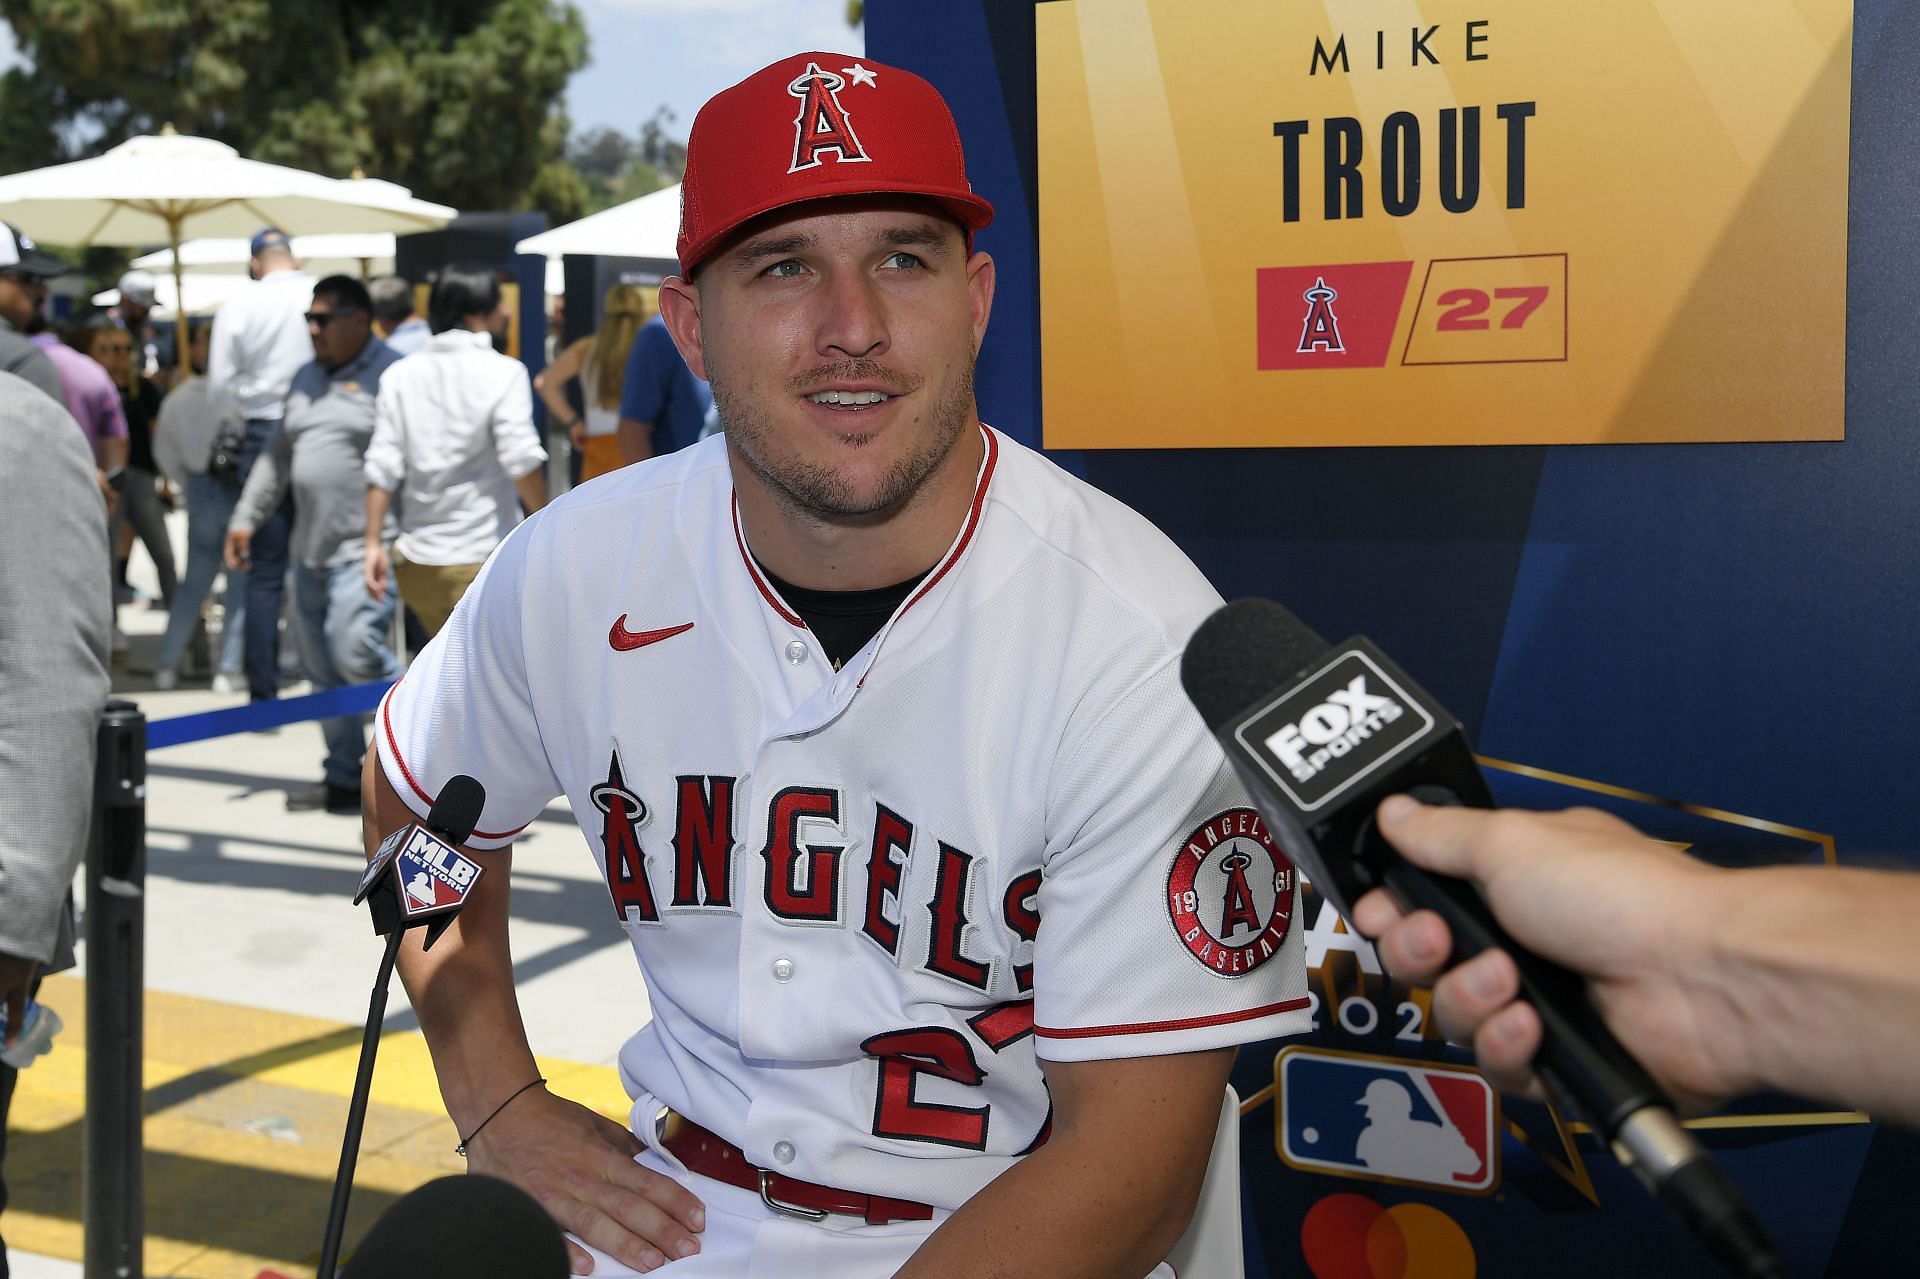 Mike Trout at the 2022 Gatorade All-Star Workout Day